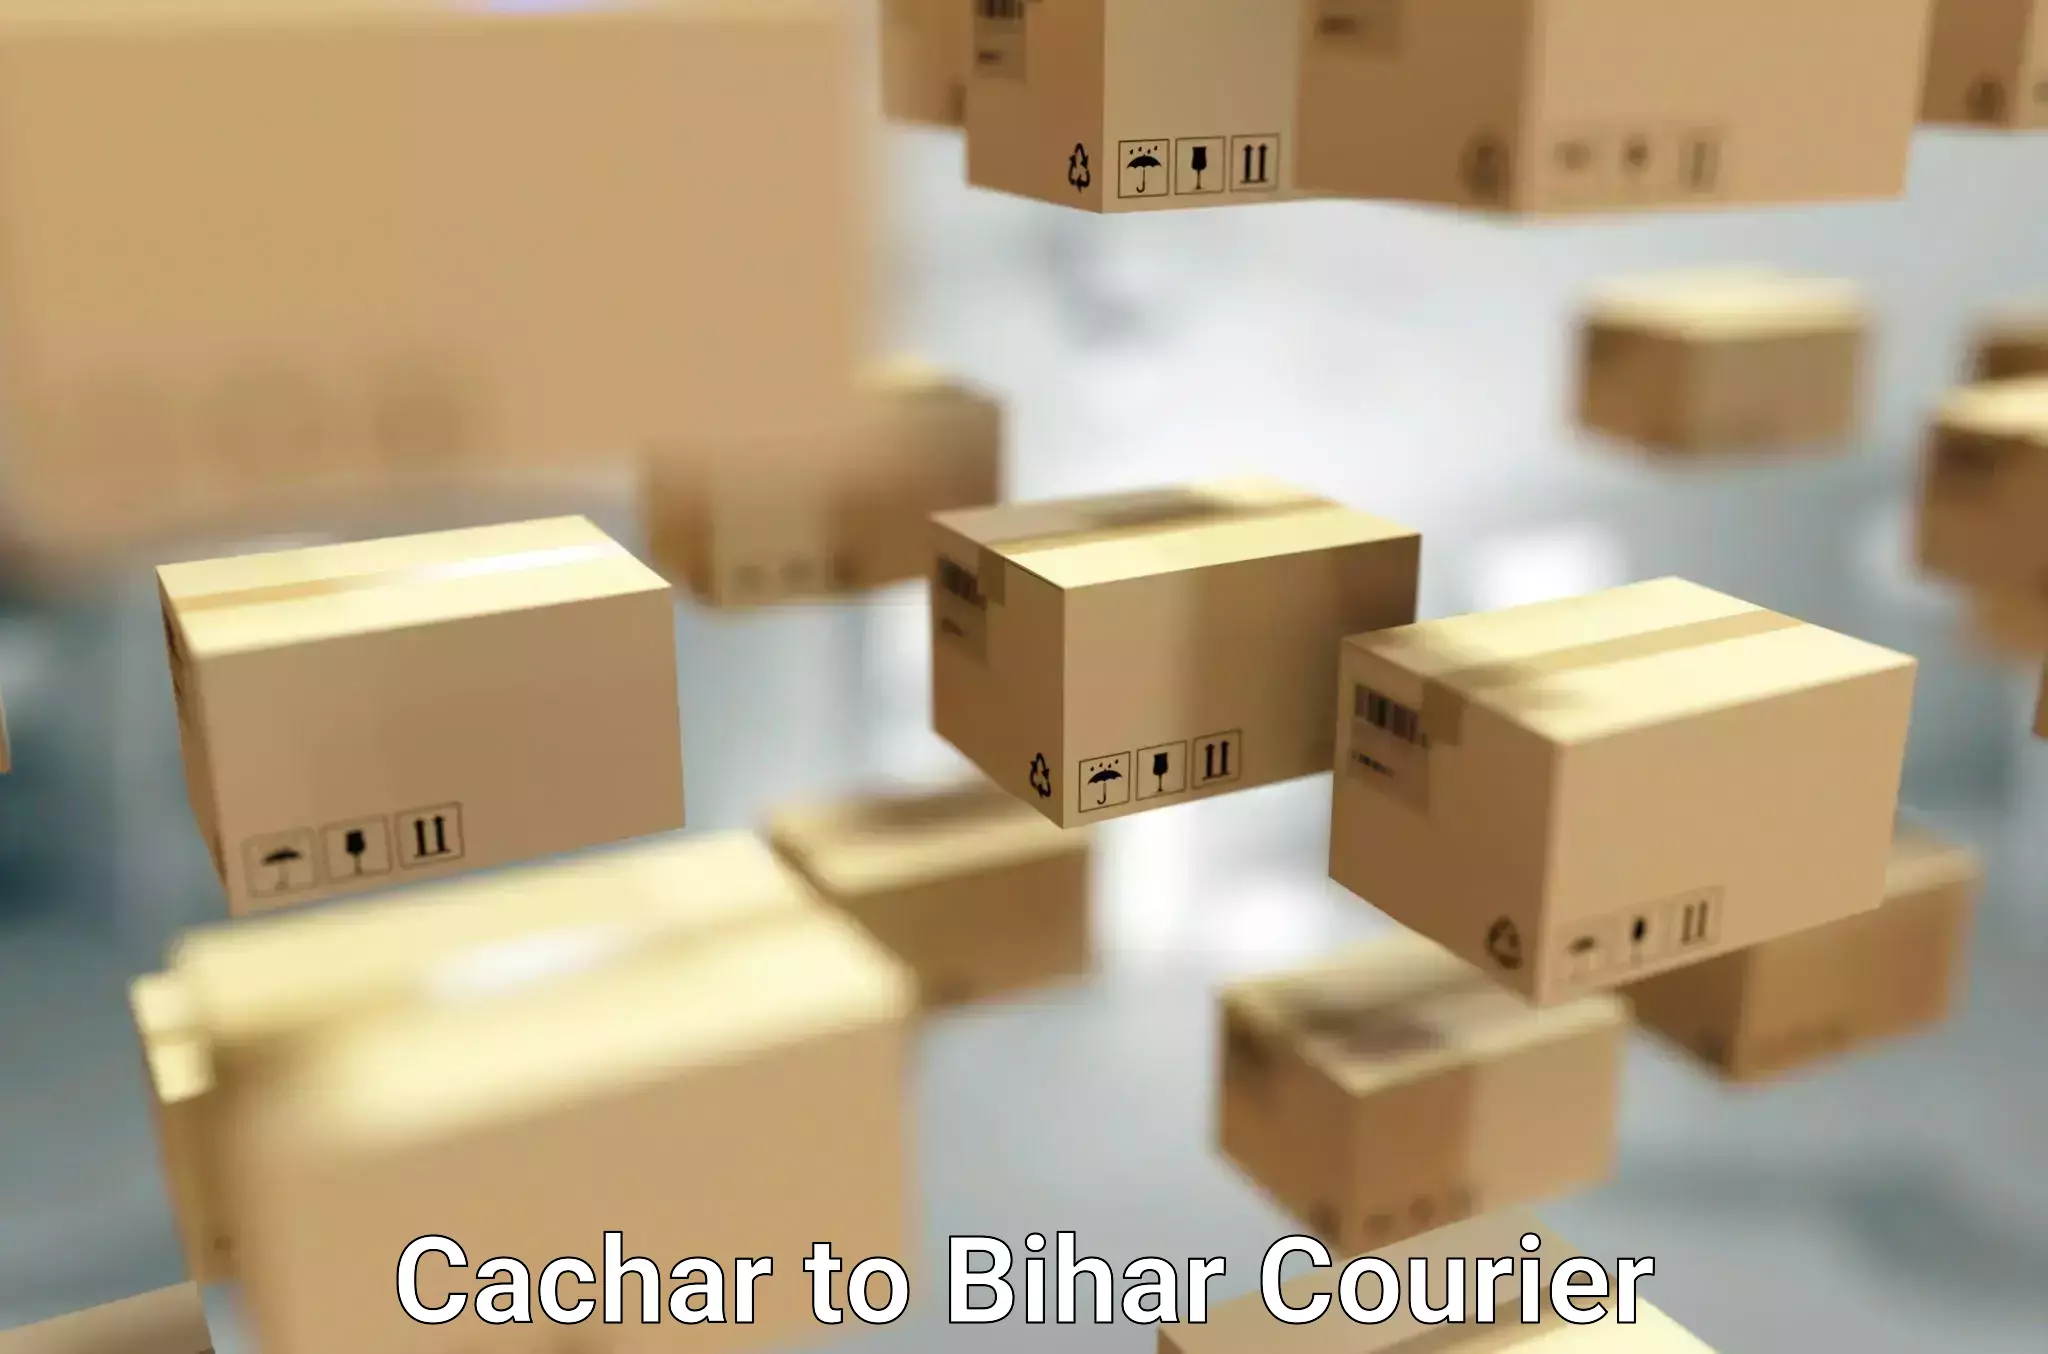 Moving and storage services Cachar to Bihar